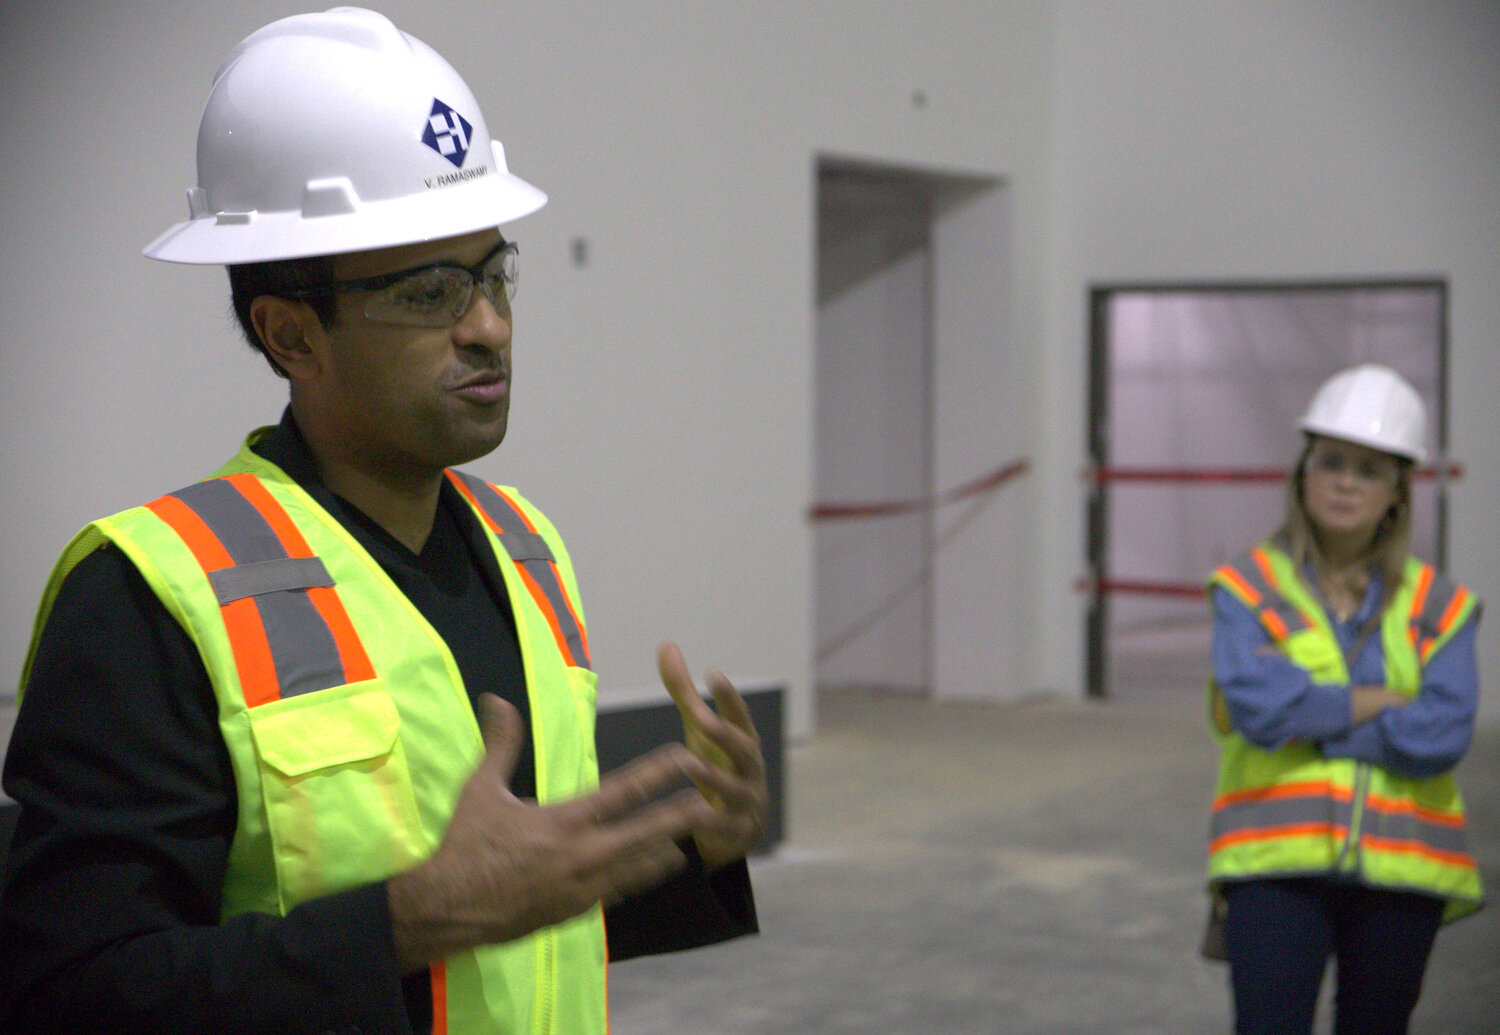 Republican presidential hopeful Vivek Ramaswamy gave brief remarks and took questions during a tour of Lexington's in-progress American Leadership Academy.